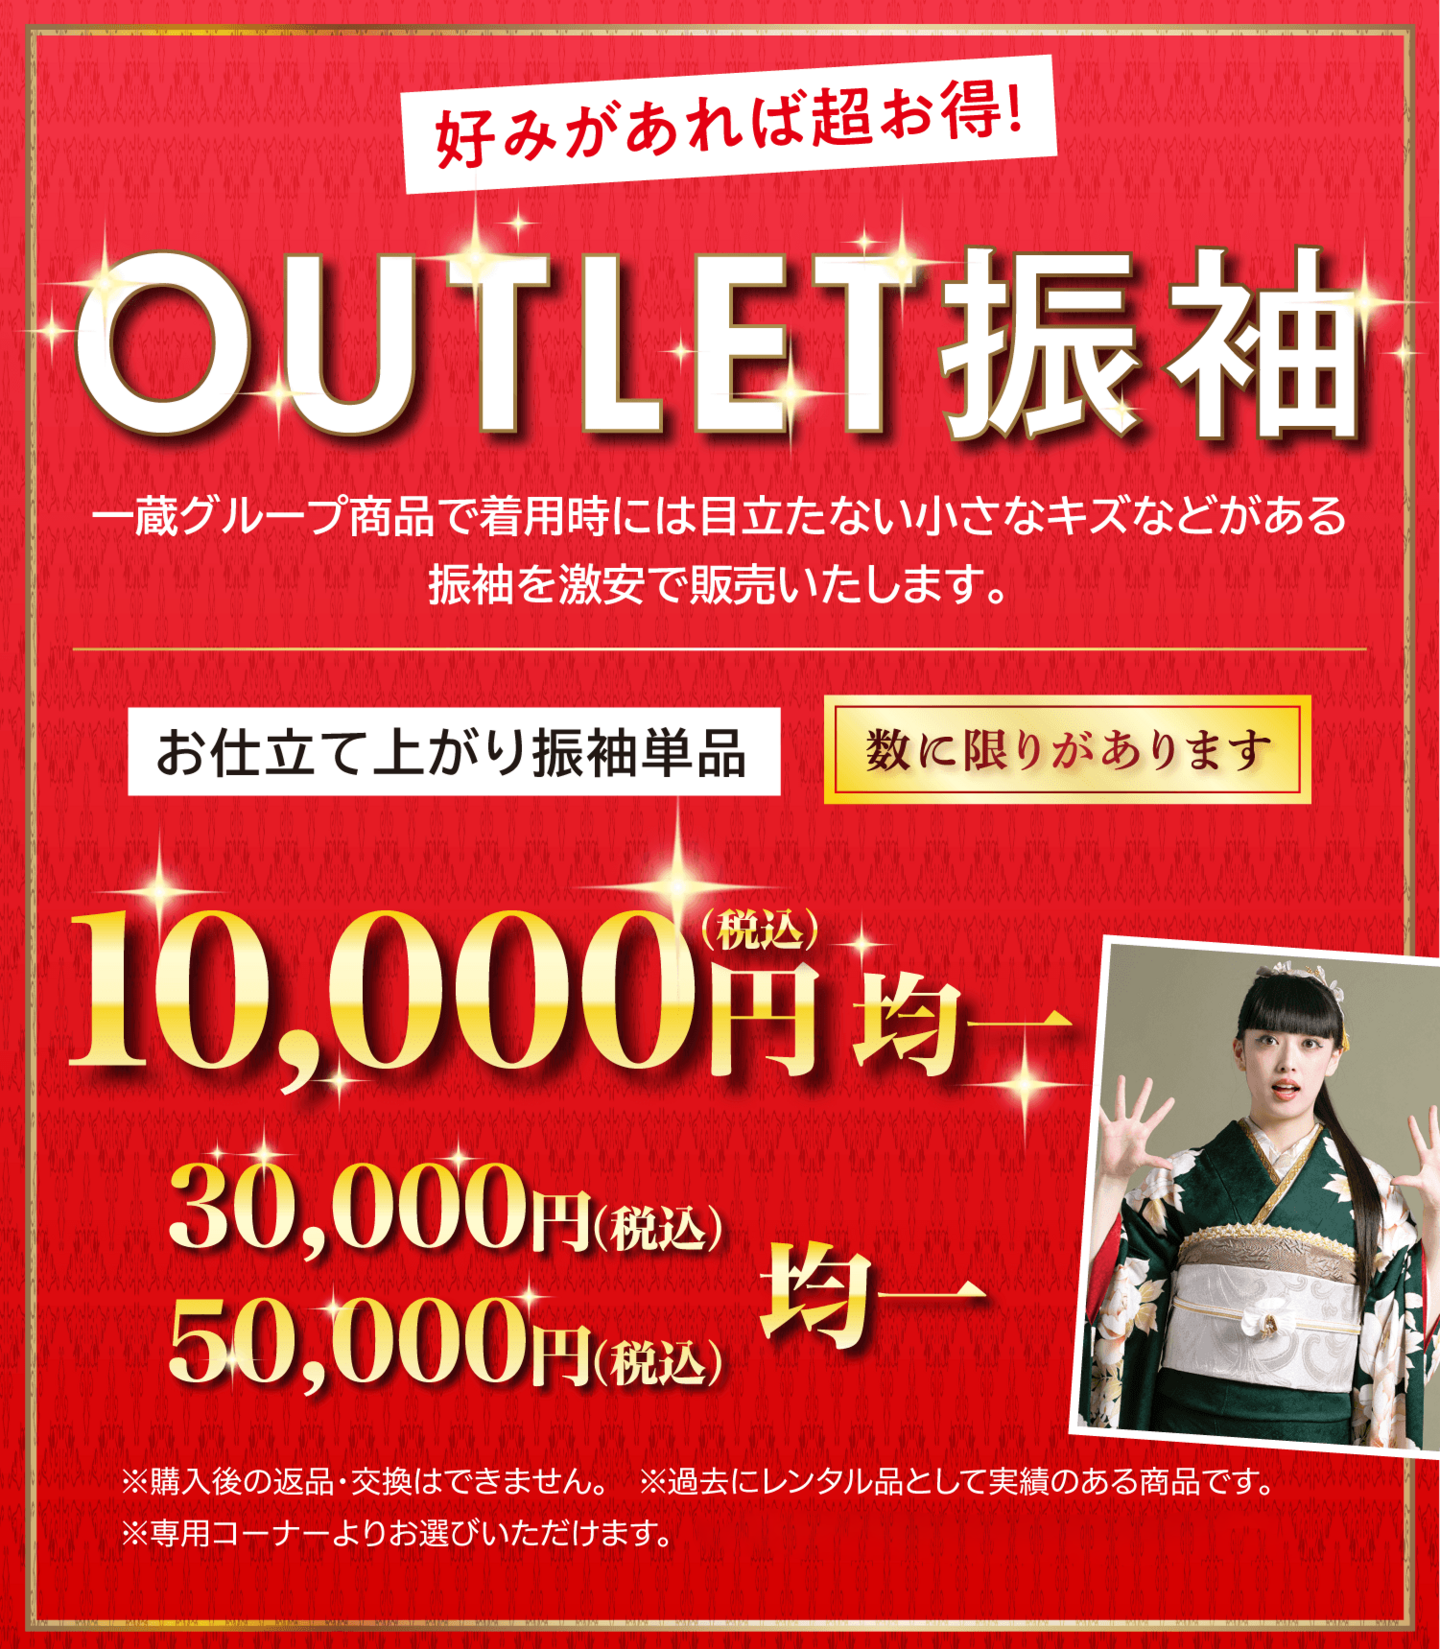 OUTLET振袖